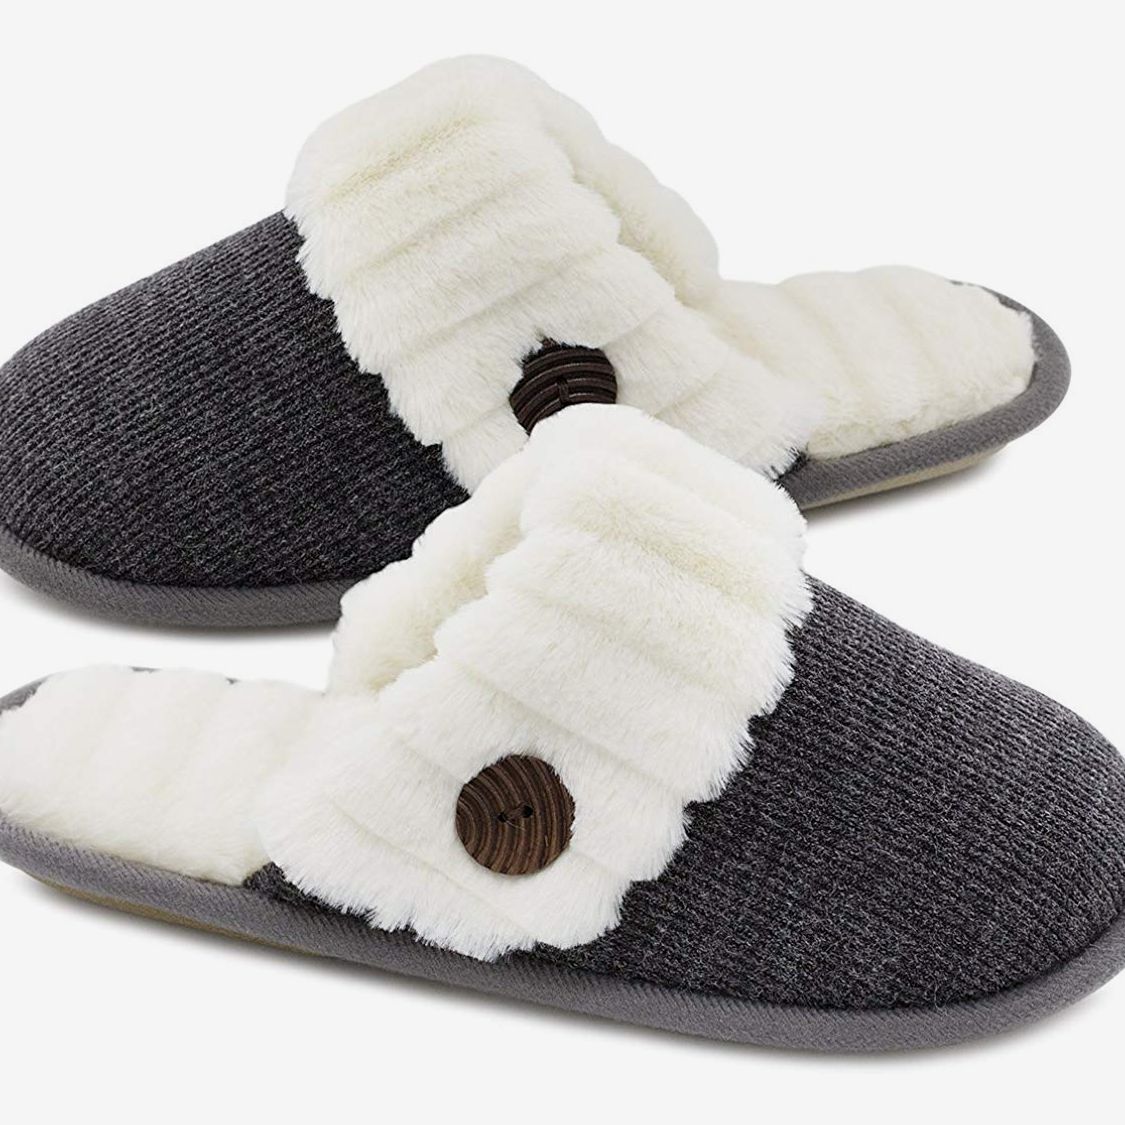 most comfortable women's slippers with arch support